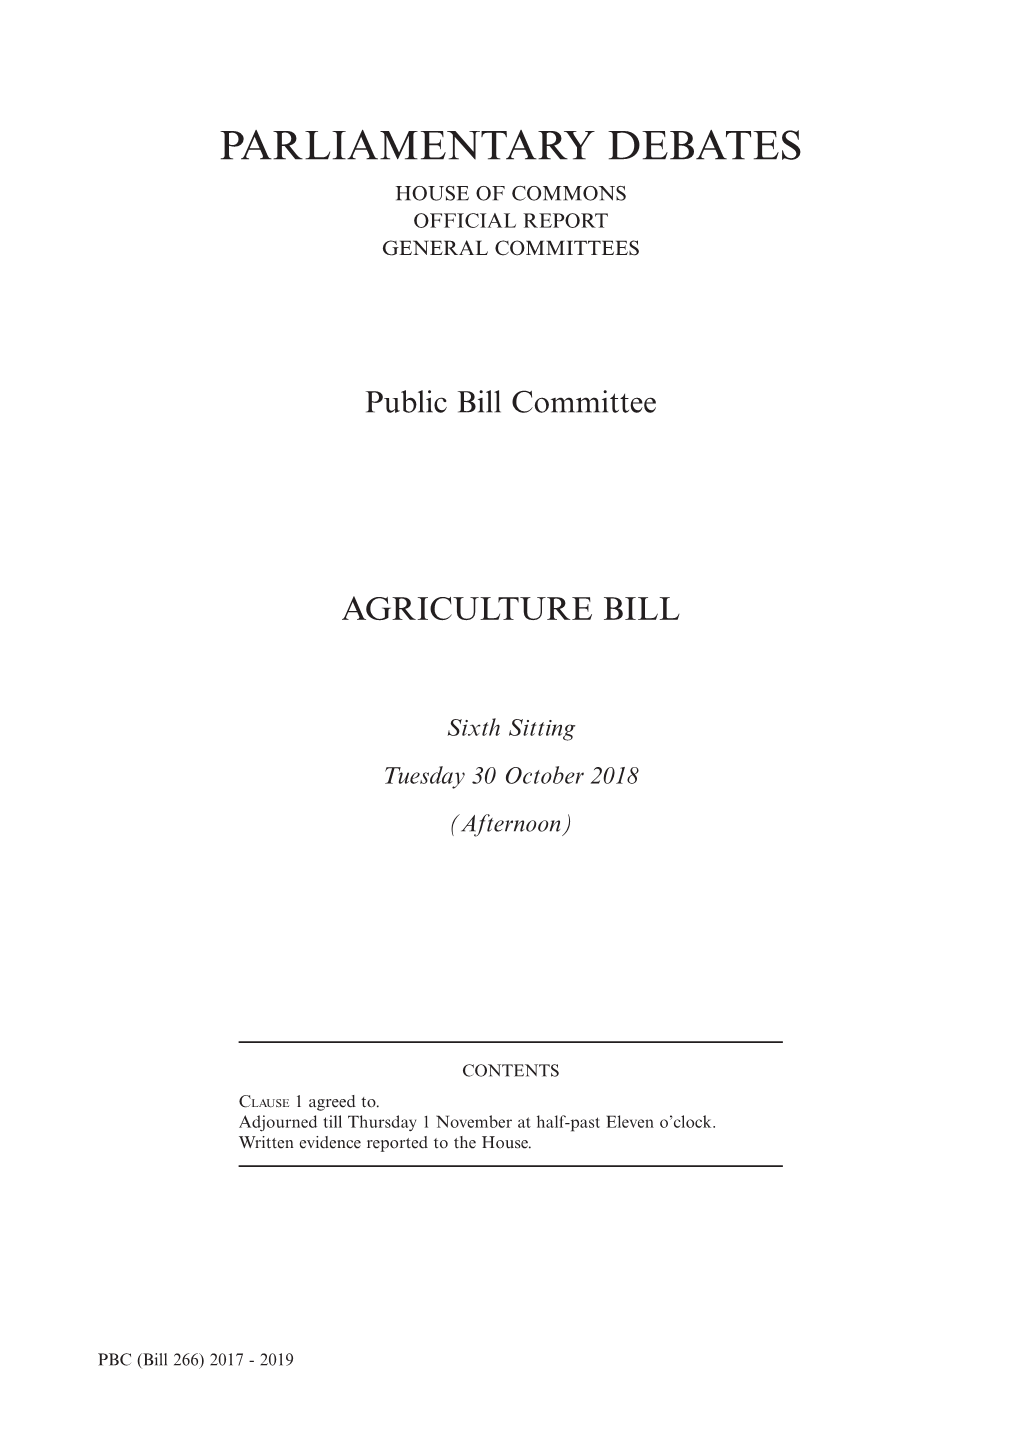 Agriculture Bill